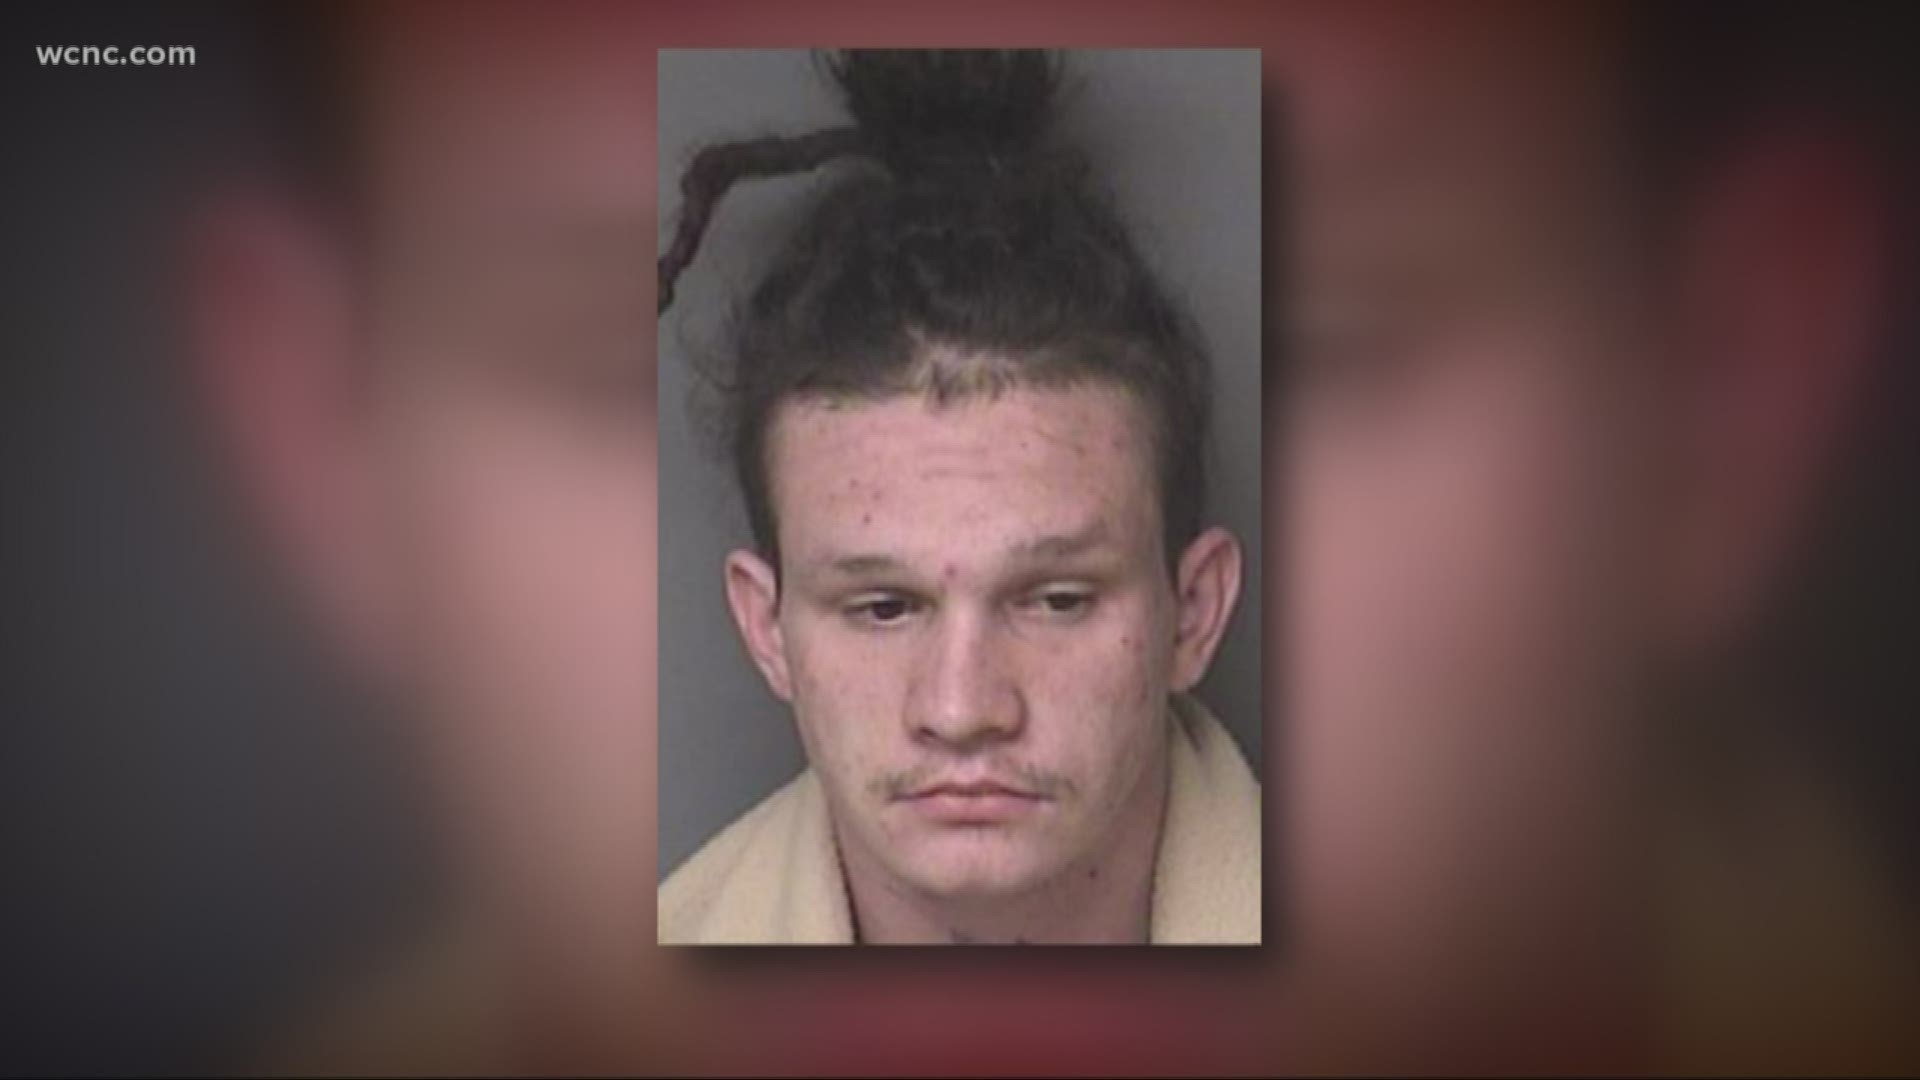 It all started with an attempted traffic stop in Gastonia late Saturday night. When the man evaded police, a pursuit began. Harrison Hillman is now in custody.